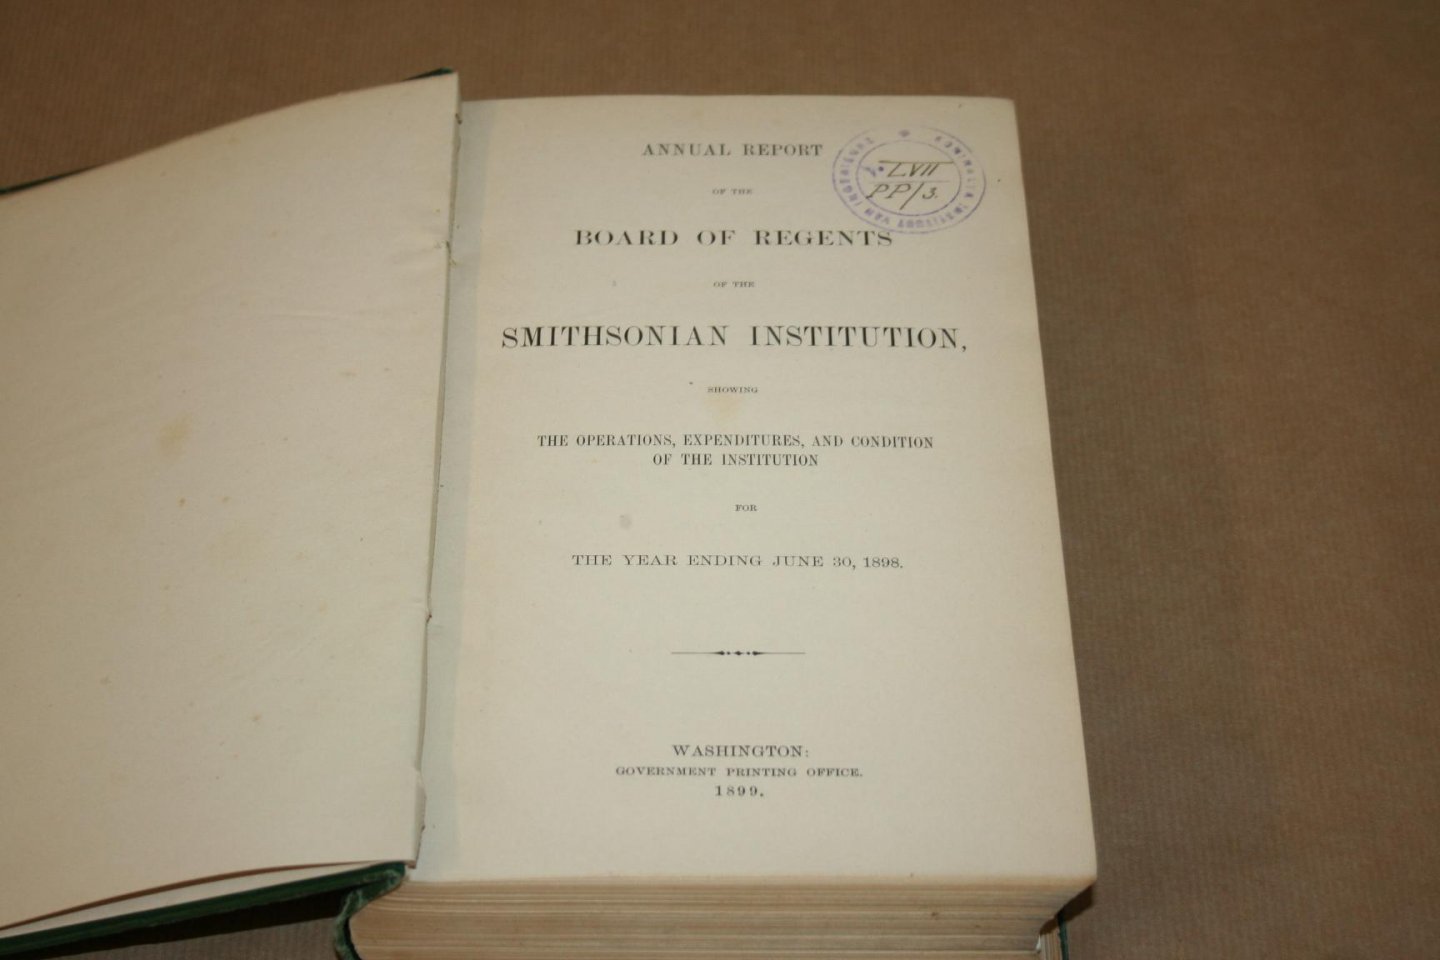  - Annual Report of the Smithsonian Institute - The Year ending June 30, 1898